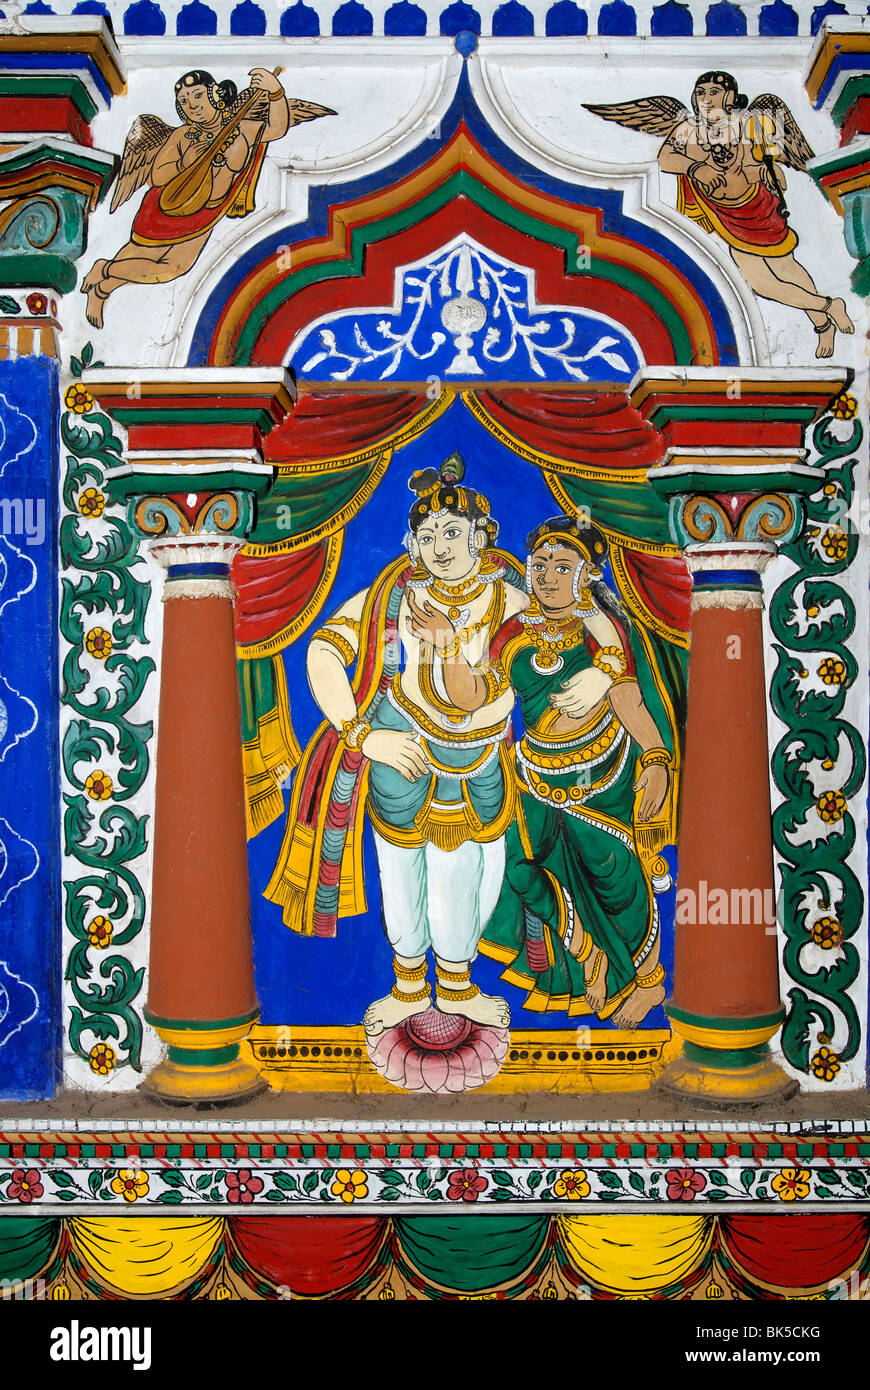 Lord Krishna with His consort Radha. 150 year old Mural (vegetable dye) and stucco work on the interior wall of the temple Stock Photo